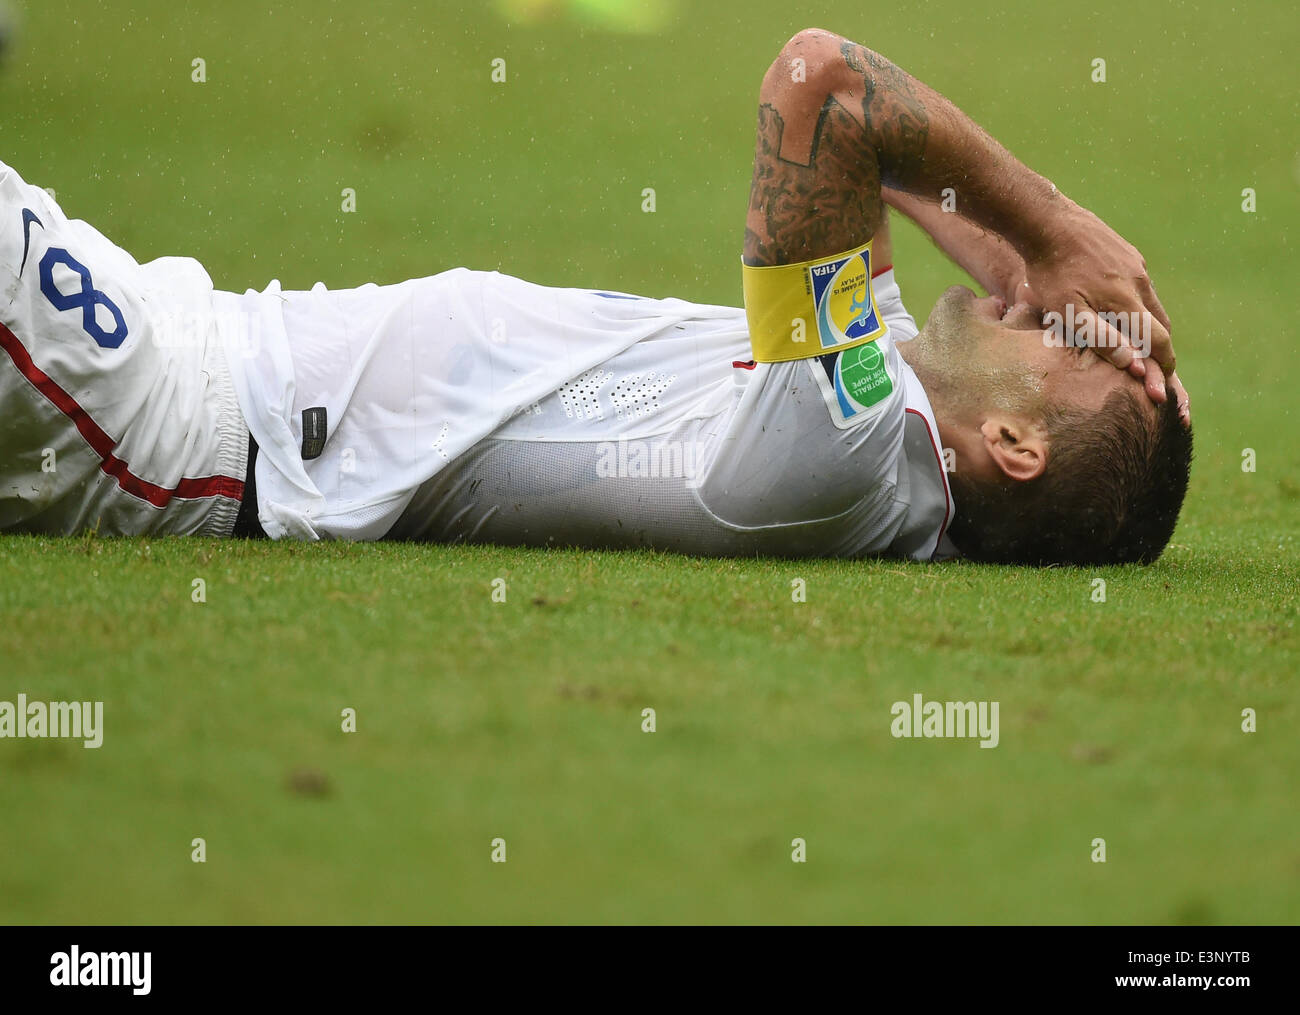 Recife, Brazil. 26th June, 2014. Clint Dempsey of the US lies on the pitch during the FIFA World Cup group G preliminary round match between the USA and Germany at Arena Pernambuco in Recife, Brazil, 26 June 2014. Photo: Marcus Brandt/dpa/Alamy Live News Stock Photo